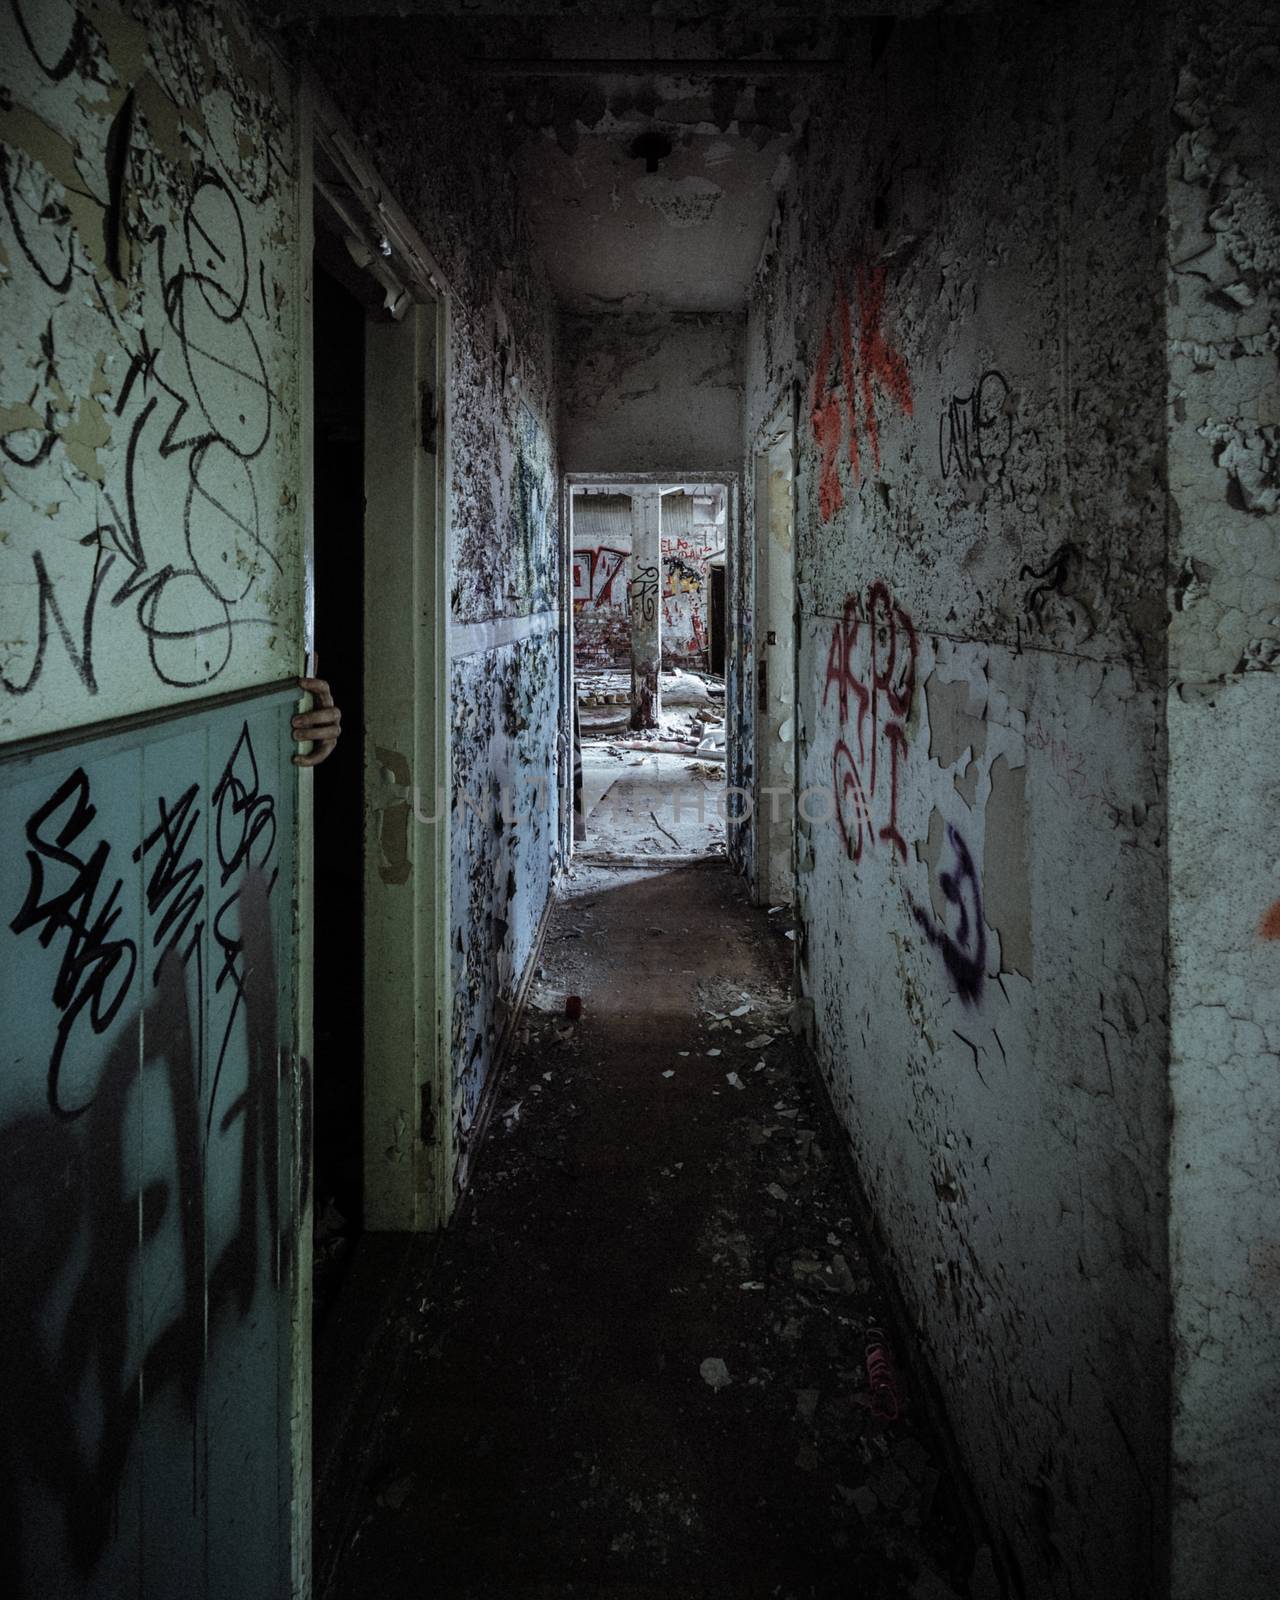 Scary abandoned corridor with hidden hand by juhku